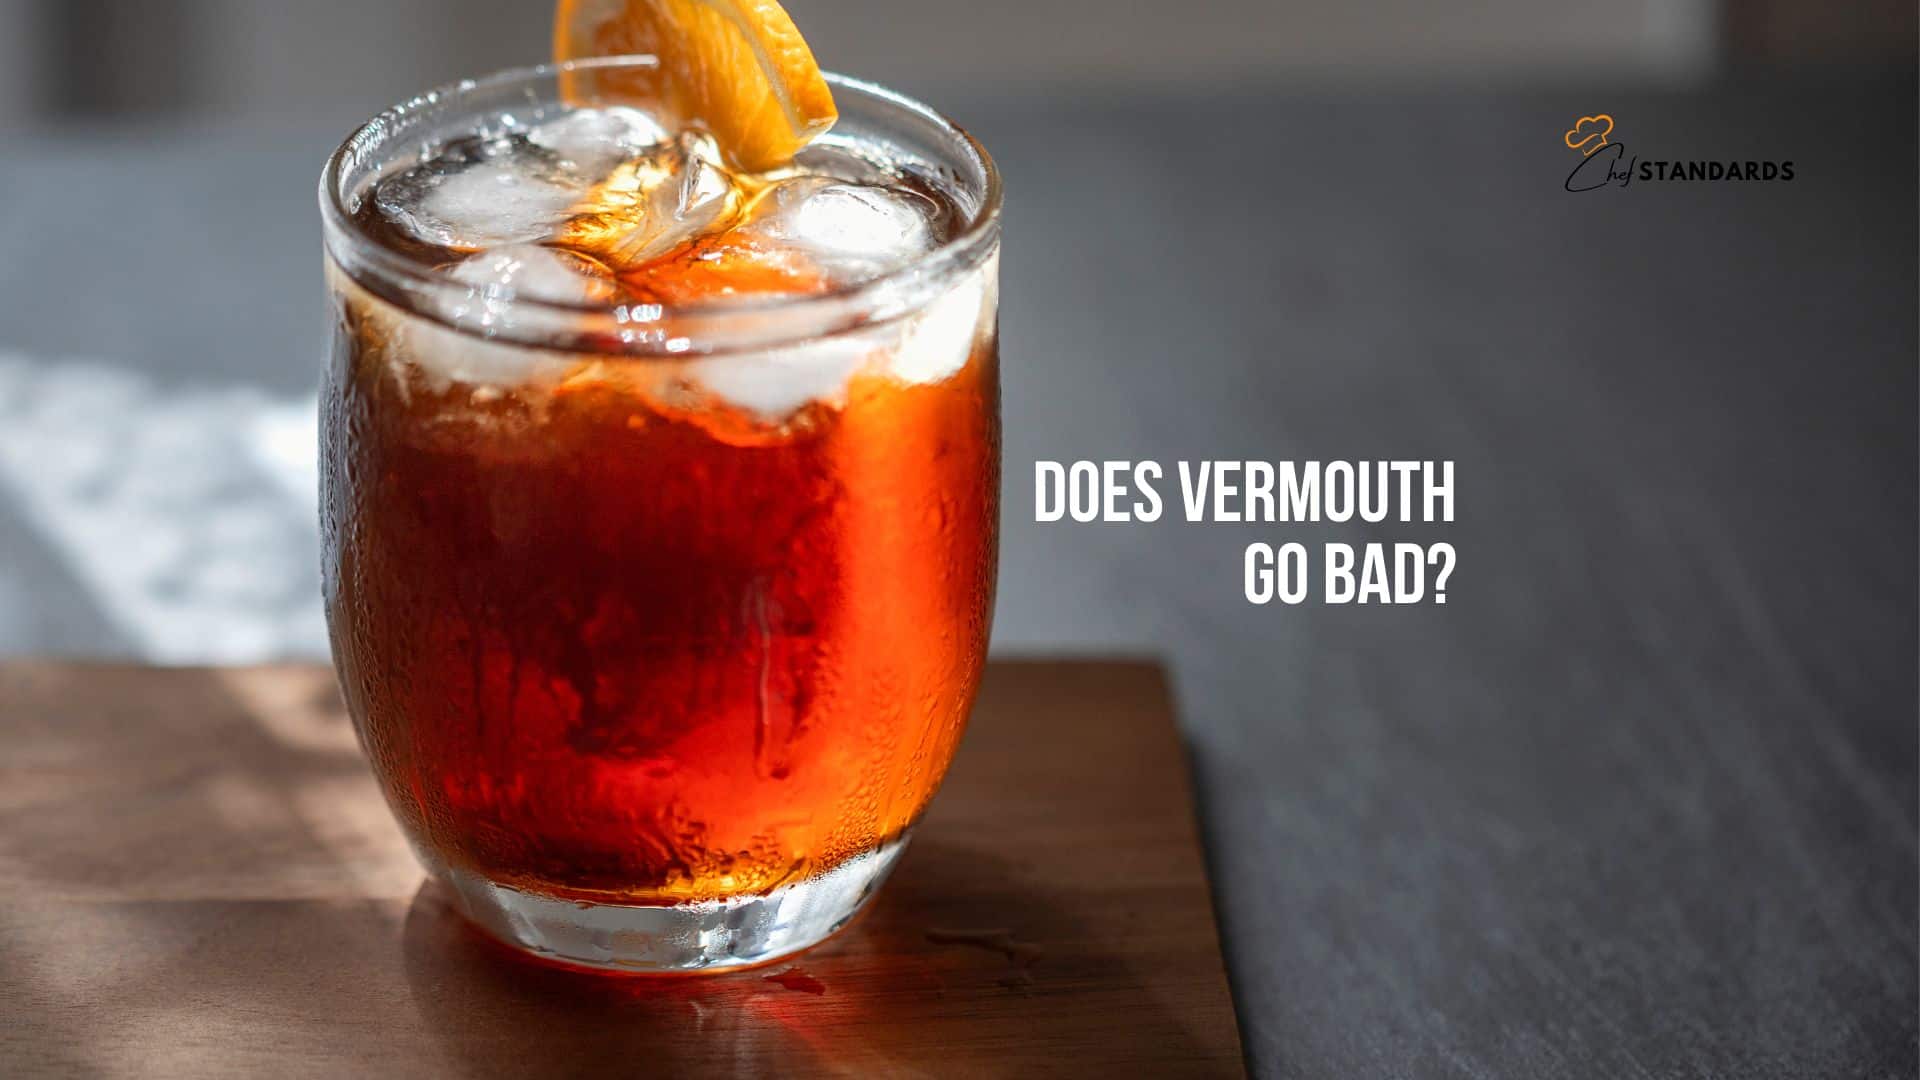 Vermouth in a glass